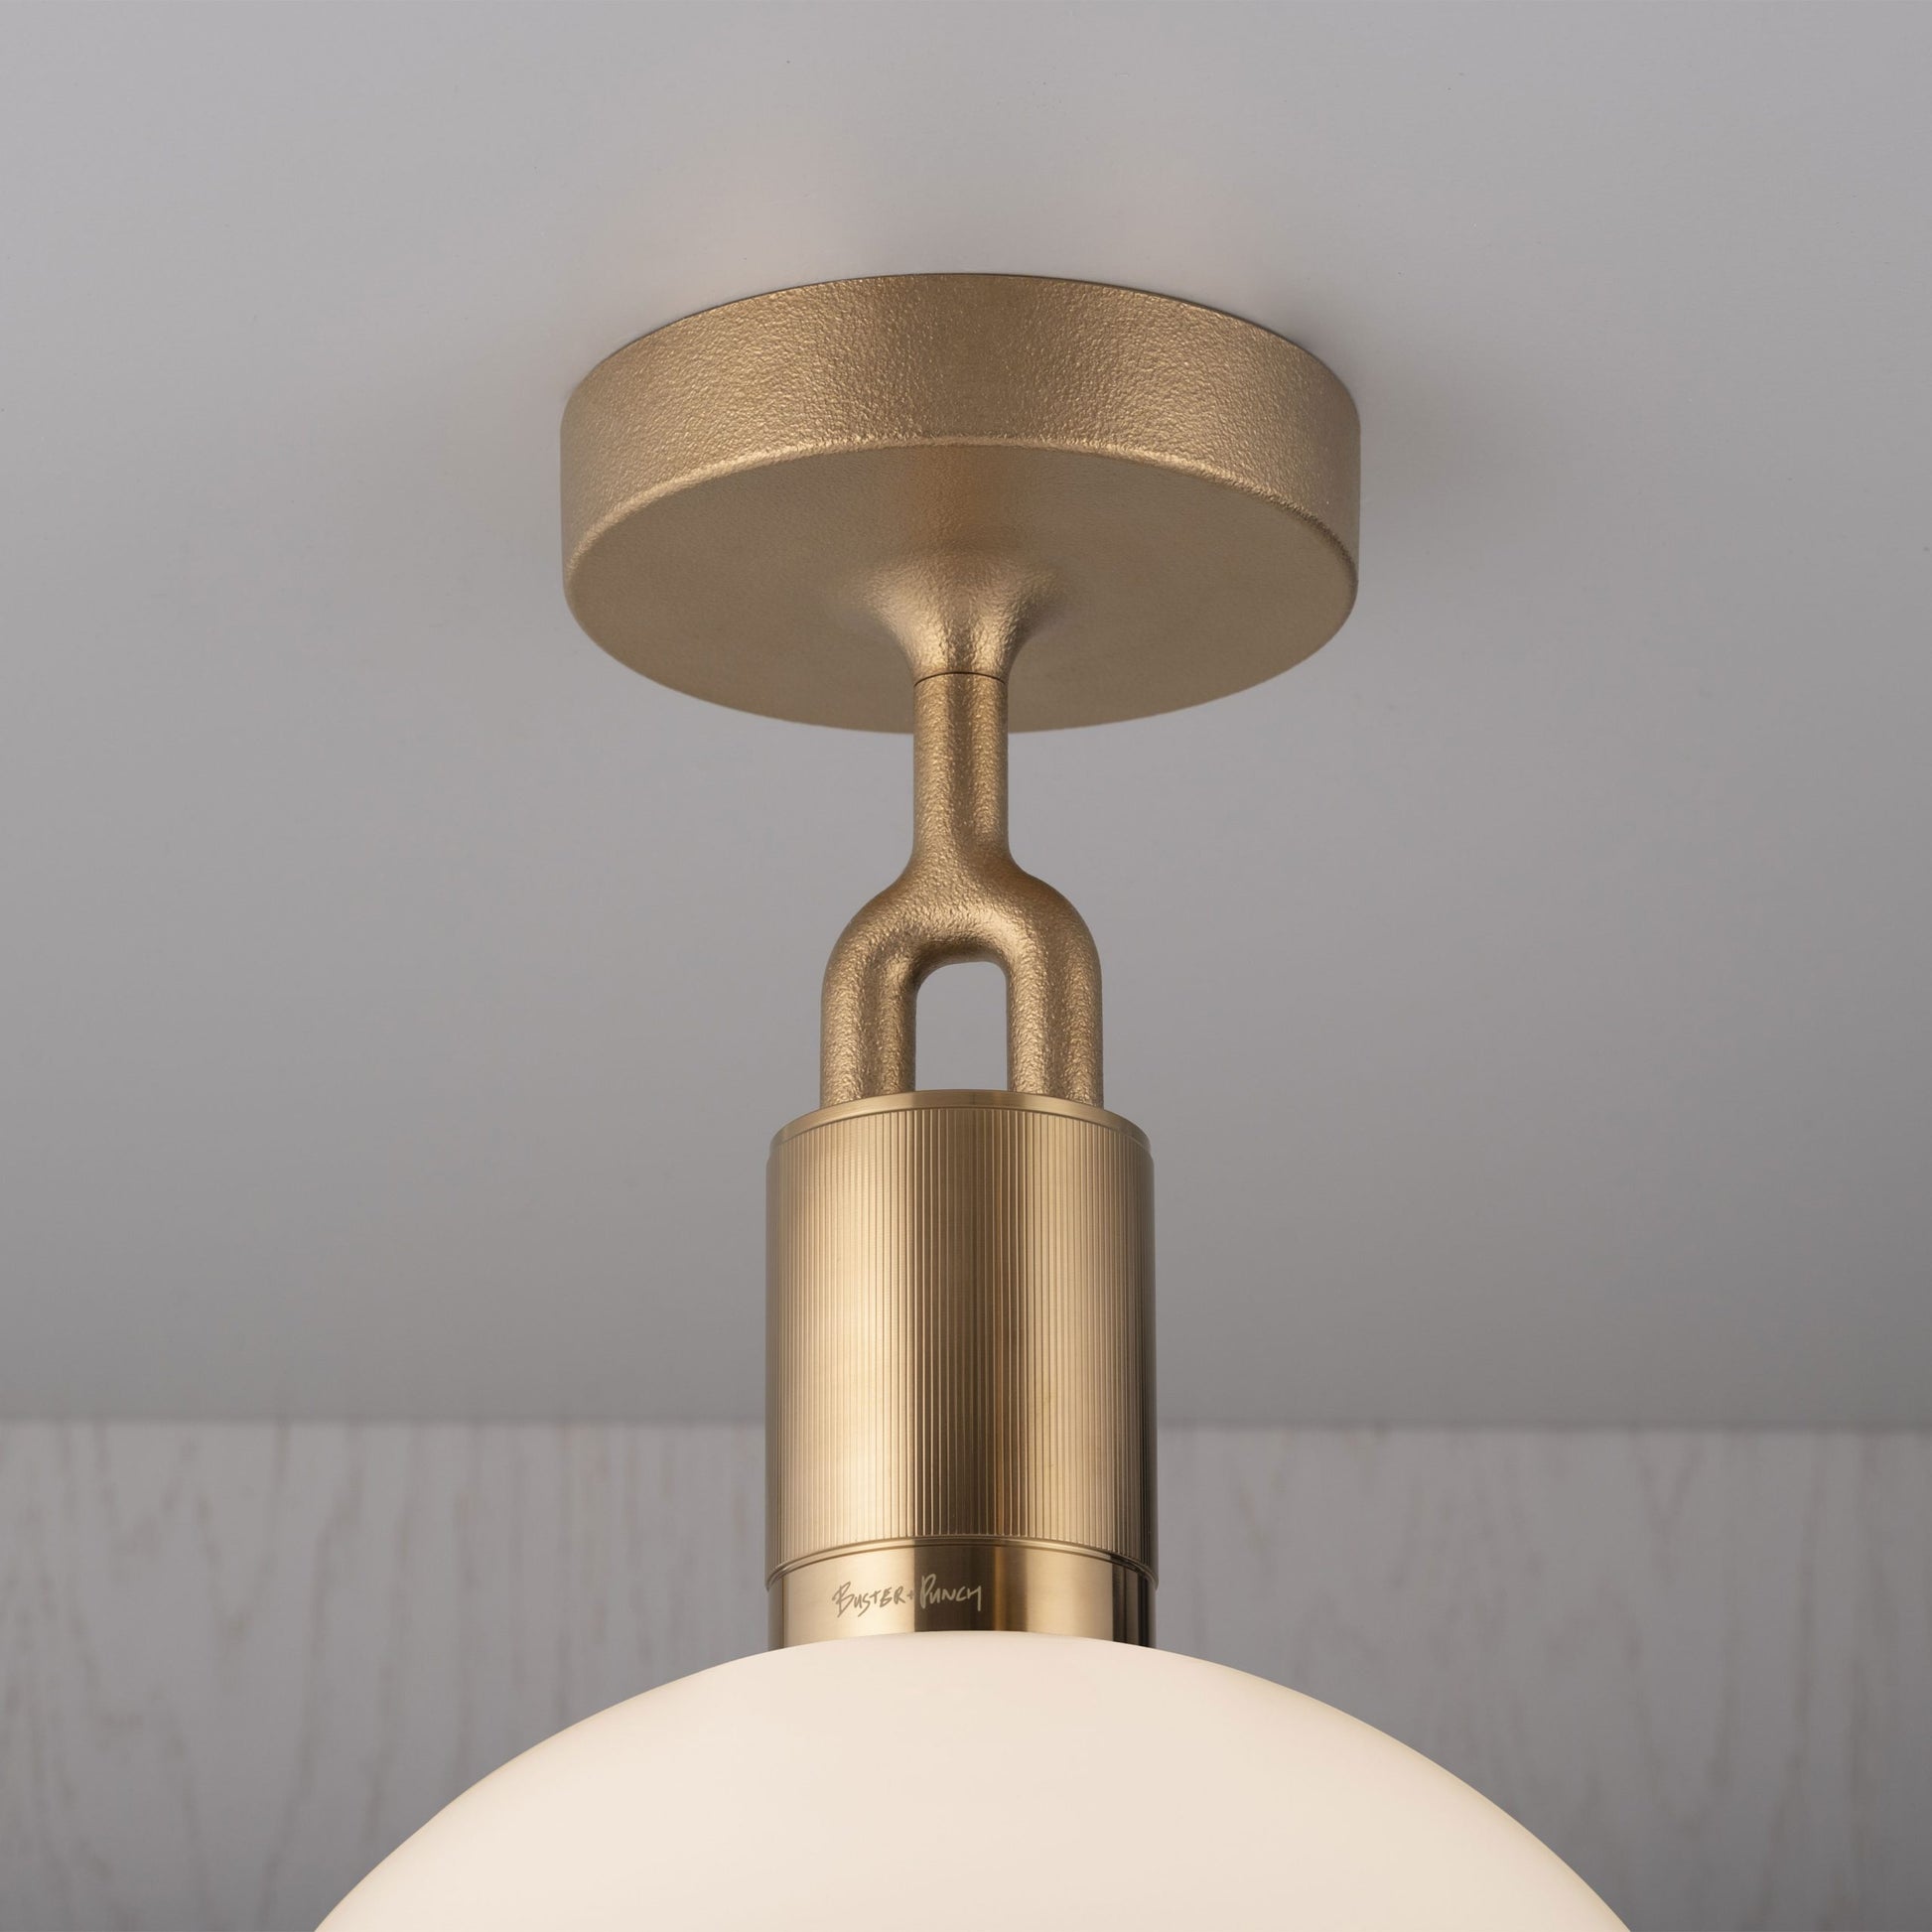 Forked Ceiling Light / Globe / Opal / Medium Brass, detailed close up of fork and fitting.